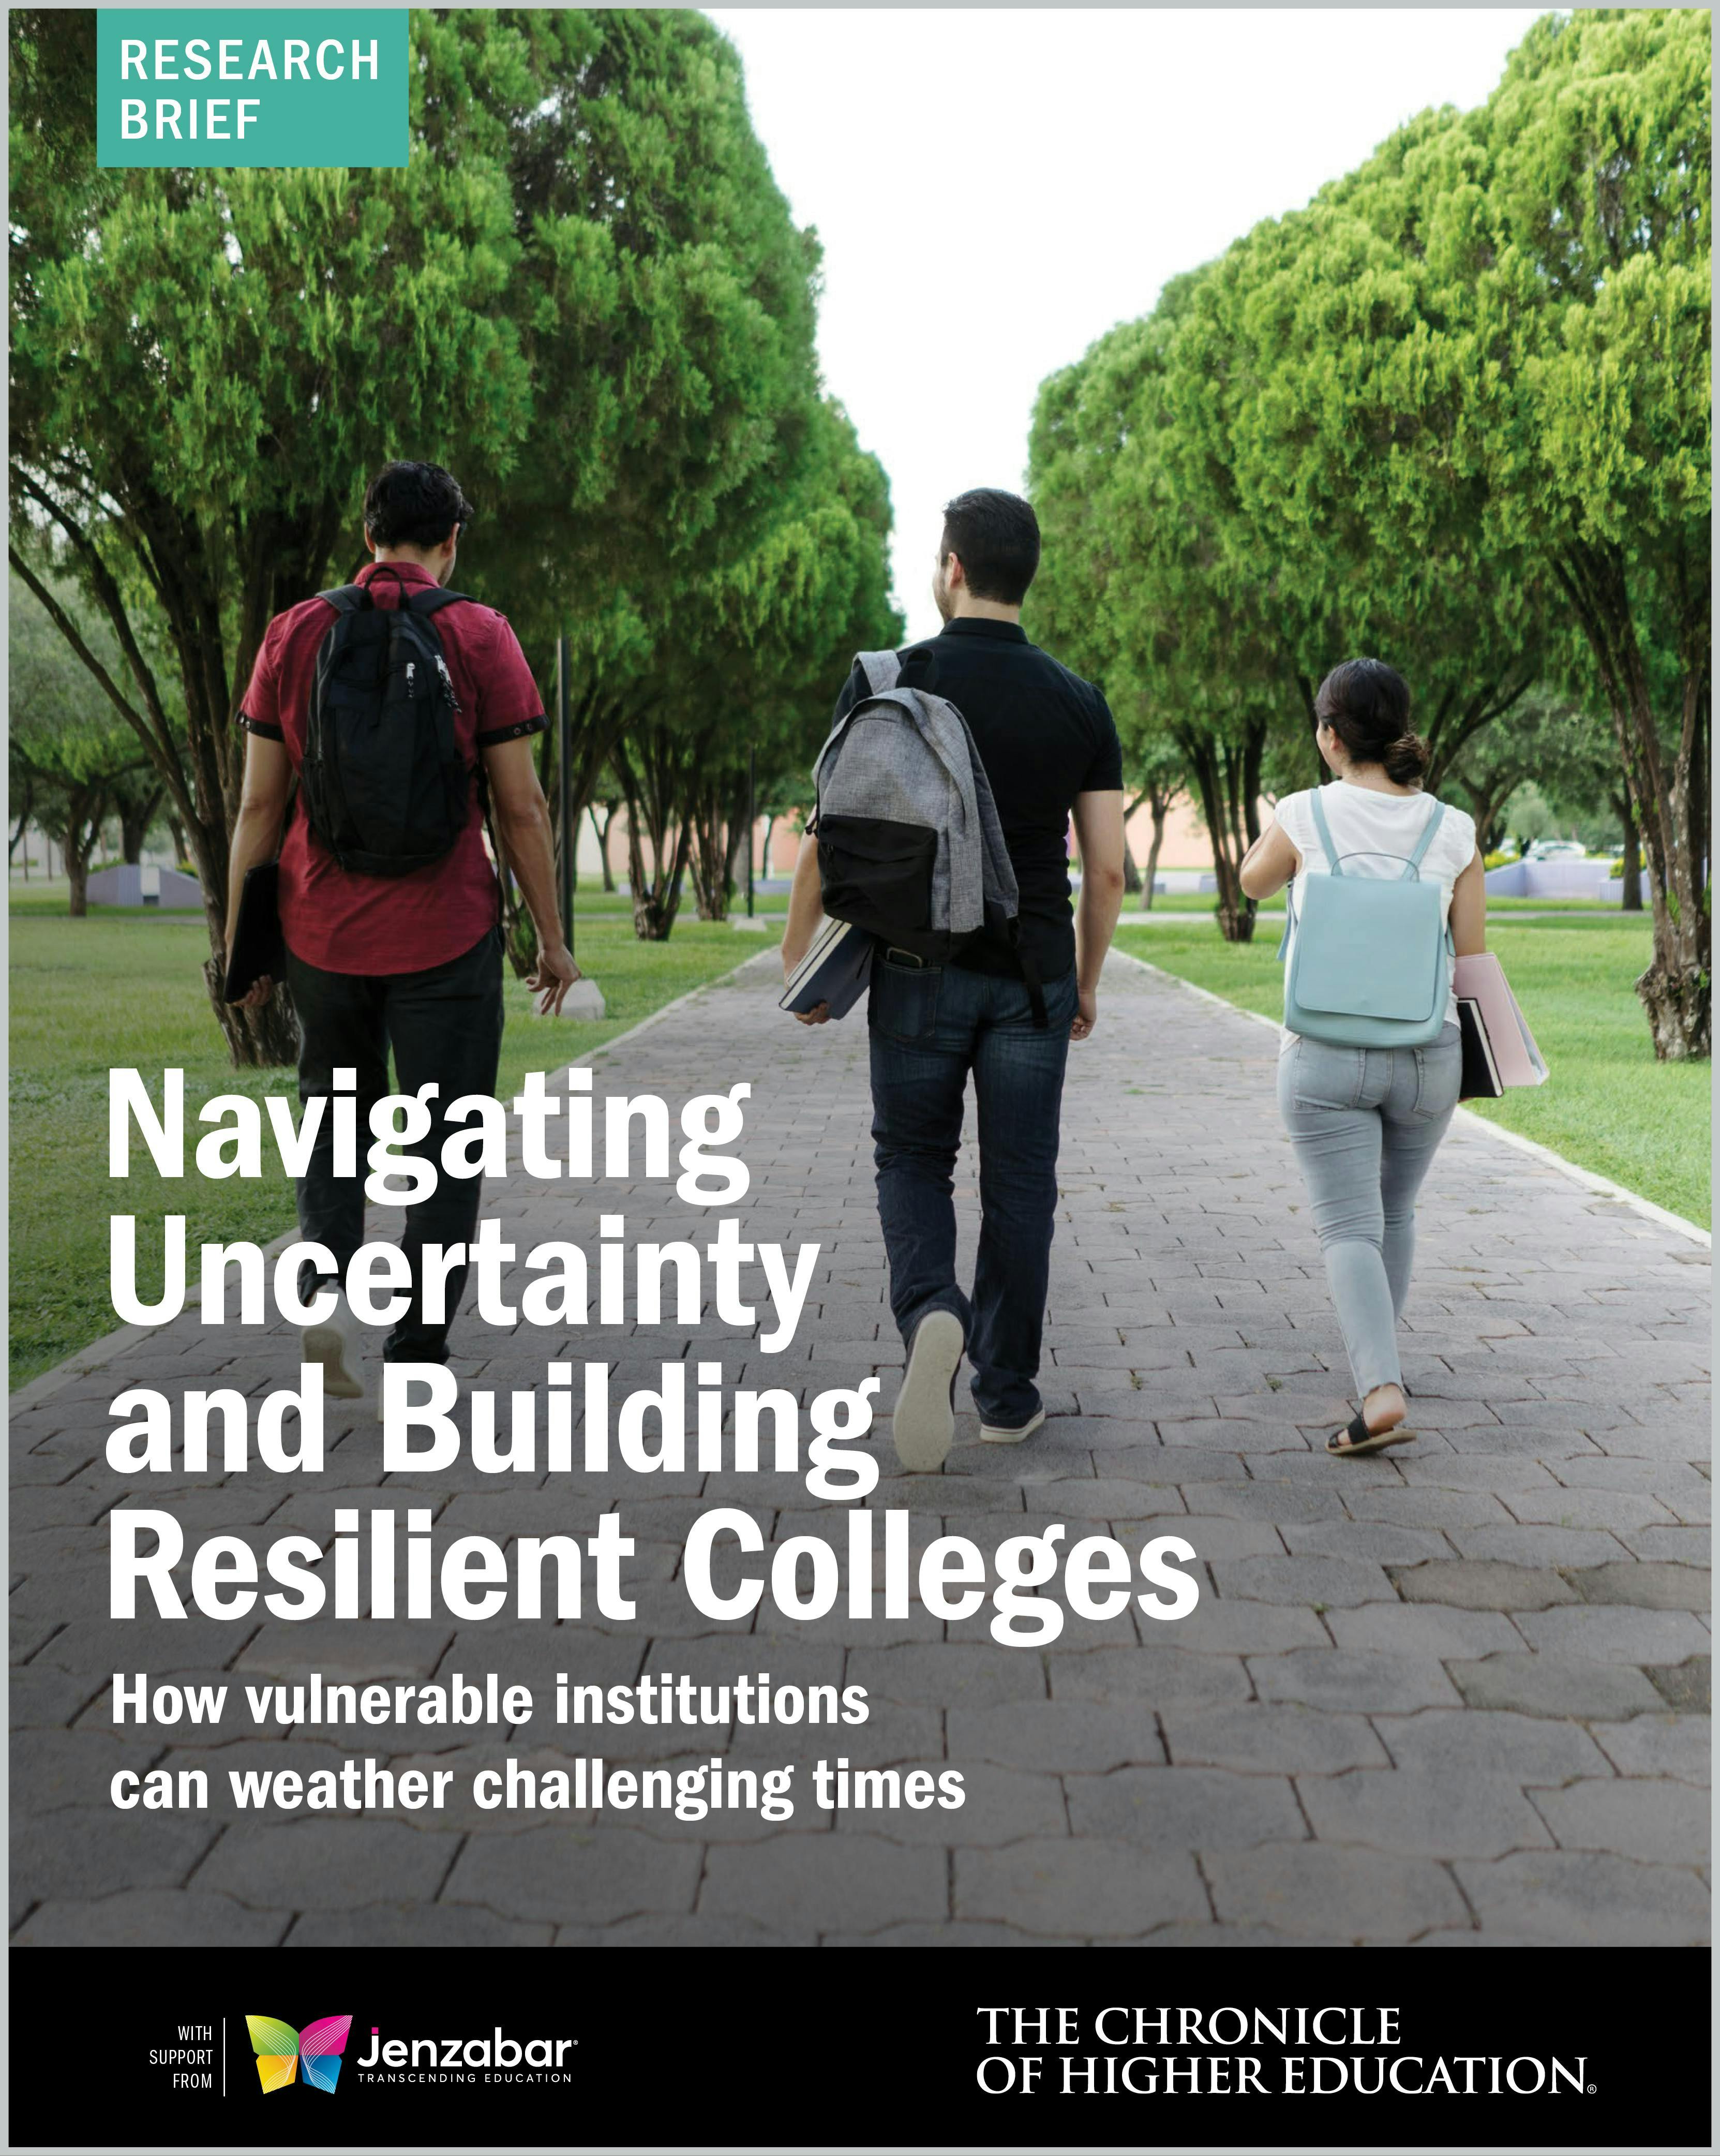 Navigating Uncertainty and Building Resilient Colleges